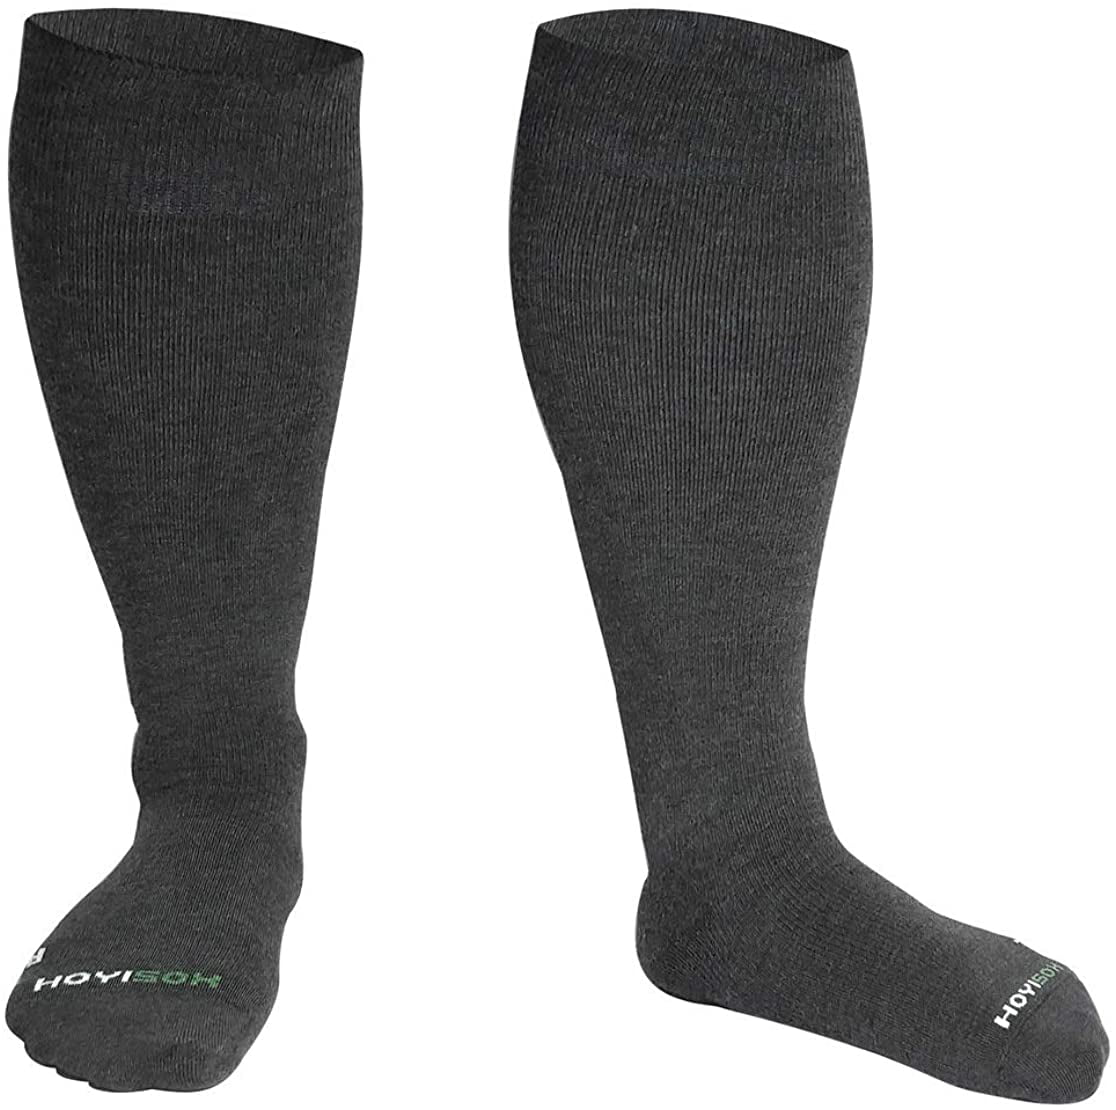 Wide Calf Extra Large 1pair HOYISOX Plus Size Compression Socks 20-30 mmHg for Men and Women Comfortable Cotton 5X-Large 